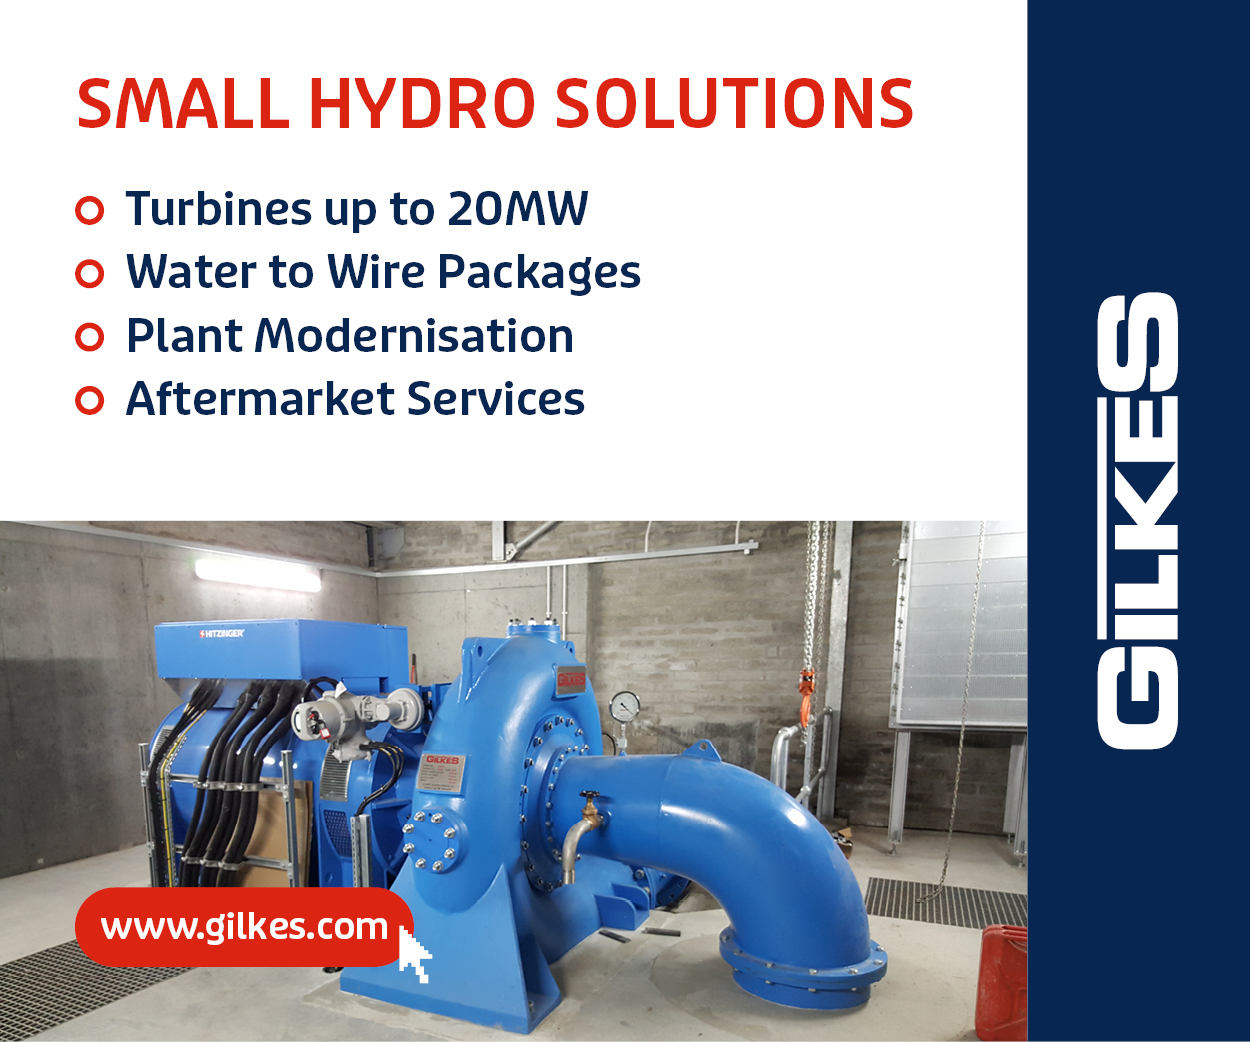 Customised engineered solutions for small hydro